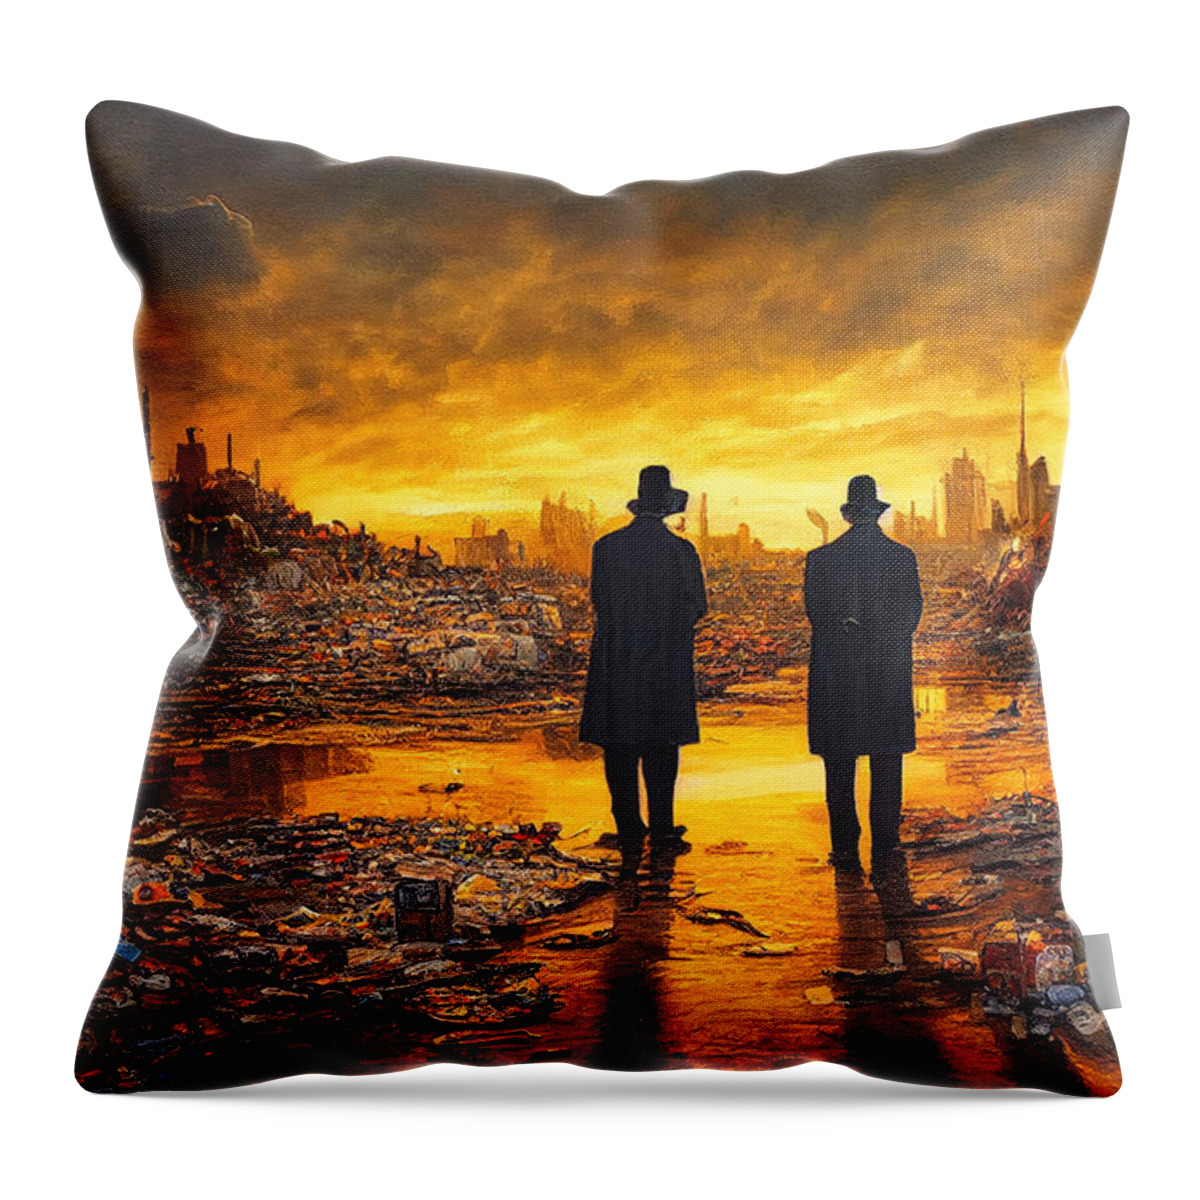 Figurative Throw Pillow featuring the digital art Sunset In Garbage Land 77 by Craig Boehman